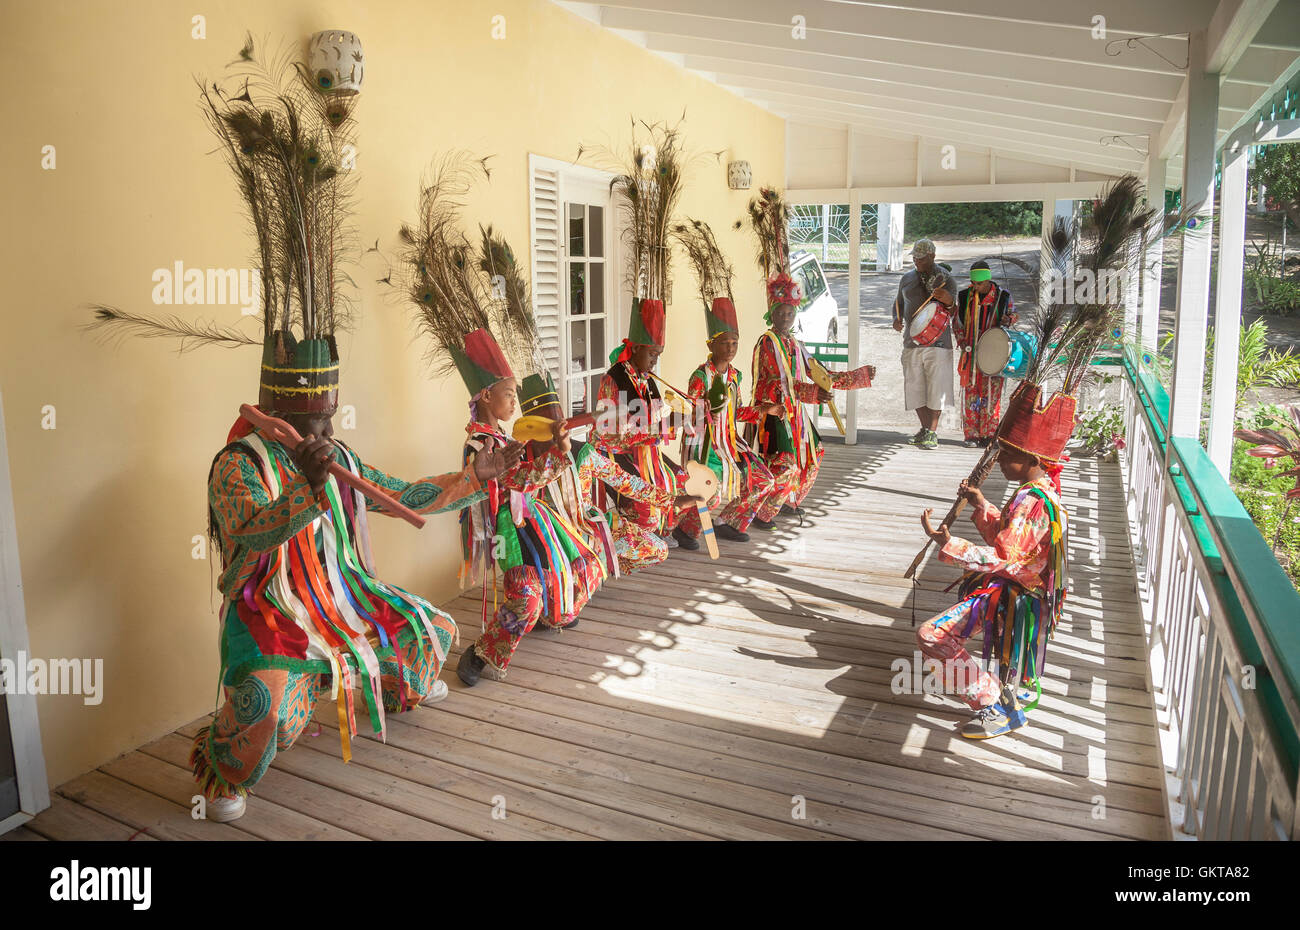 Dancers  in traditional costume visit homes and villas at Xmas Stock Photo